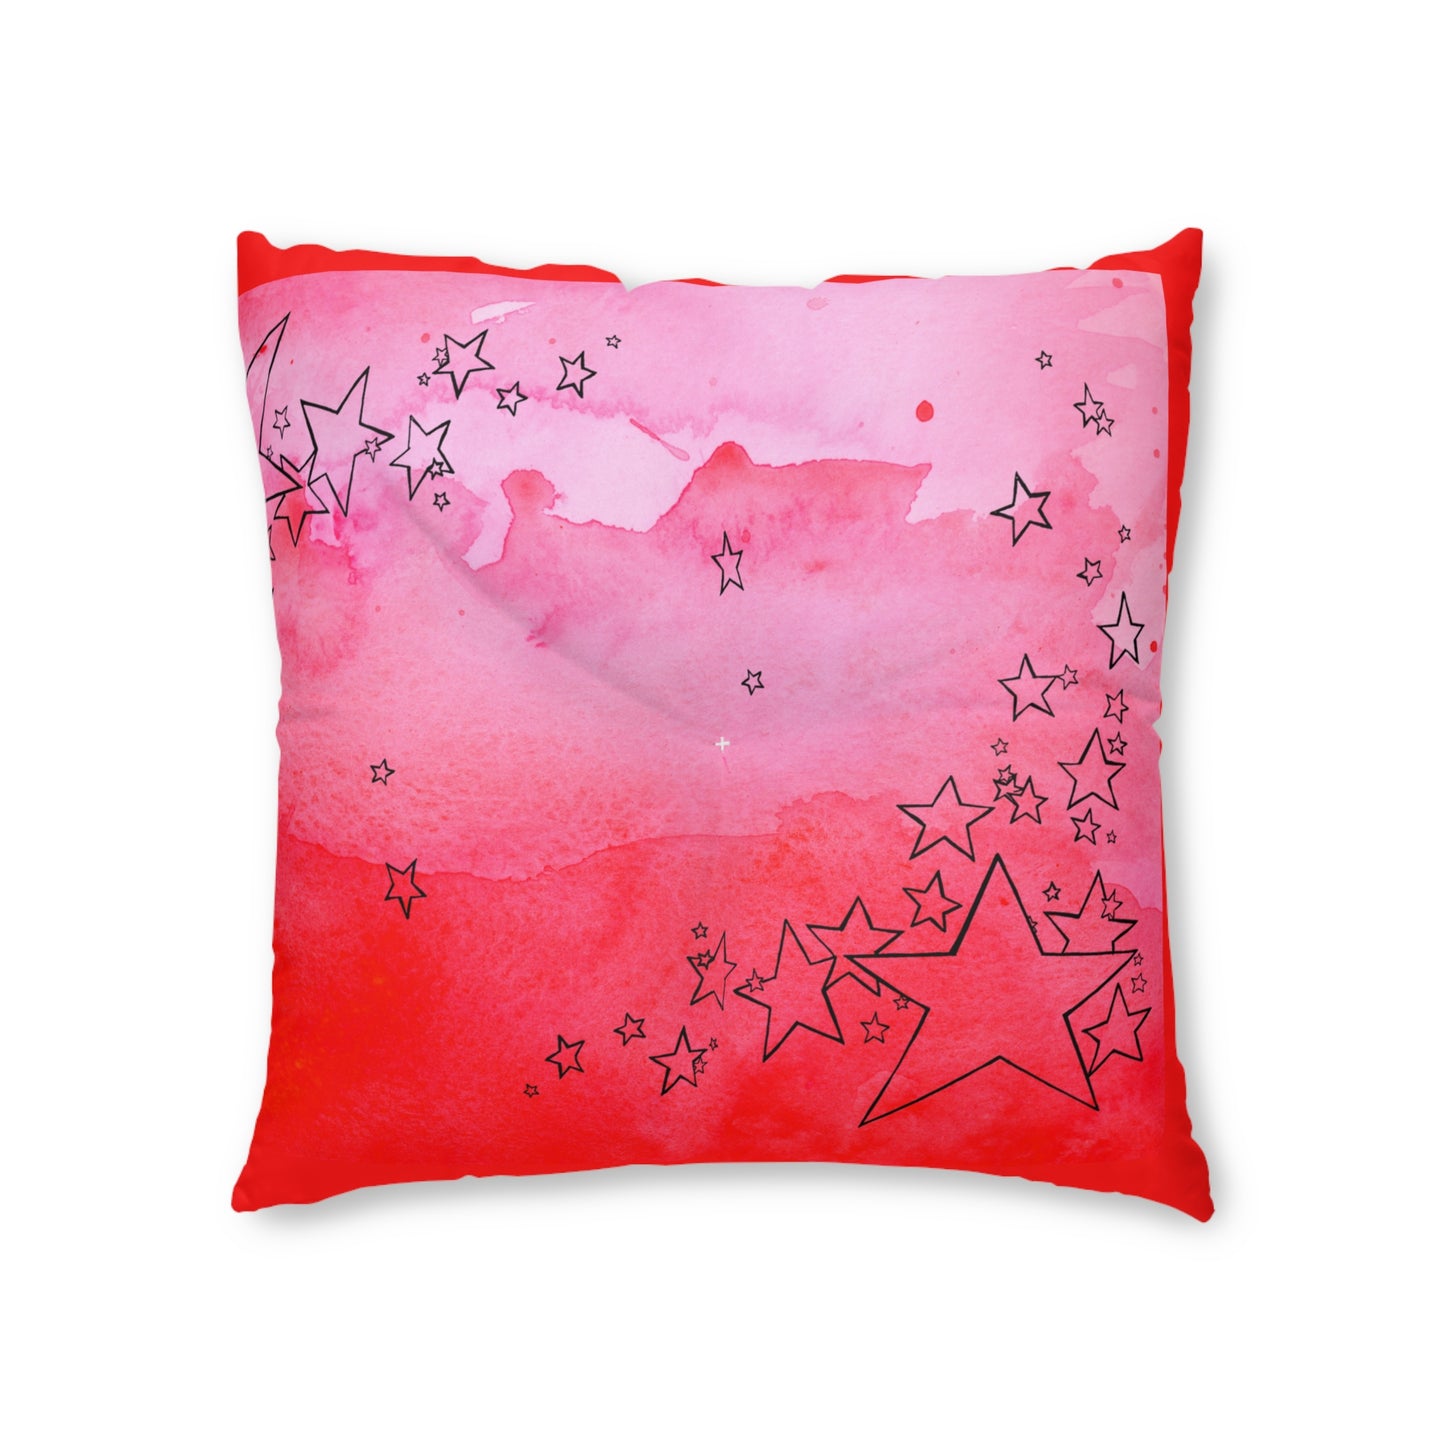 Red Tufted  Square Floor Pillow with Star Illustration